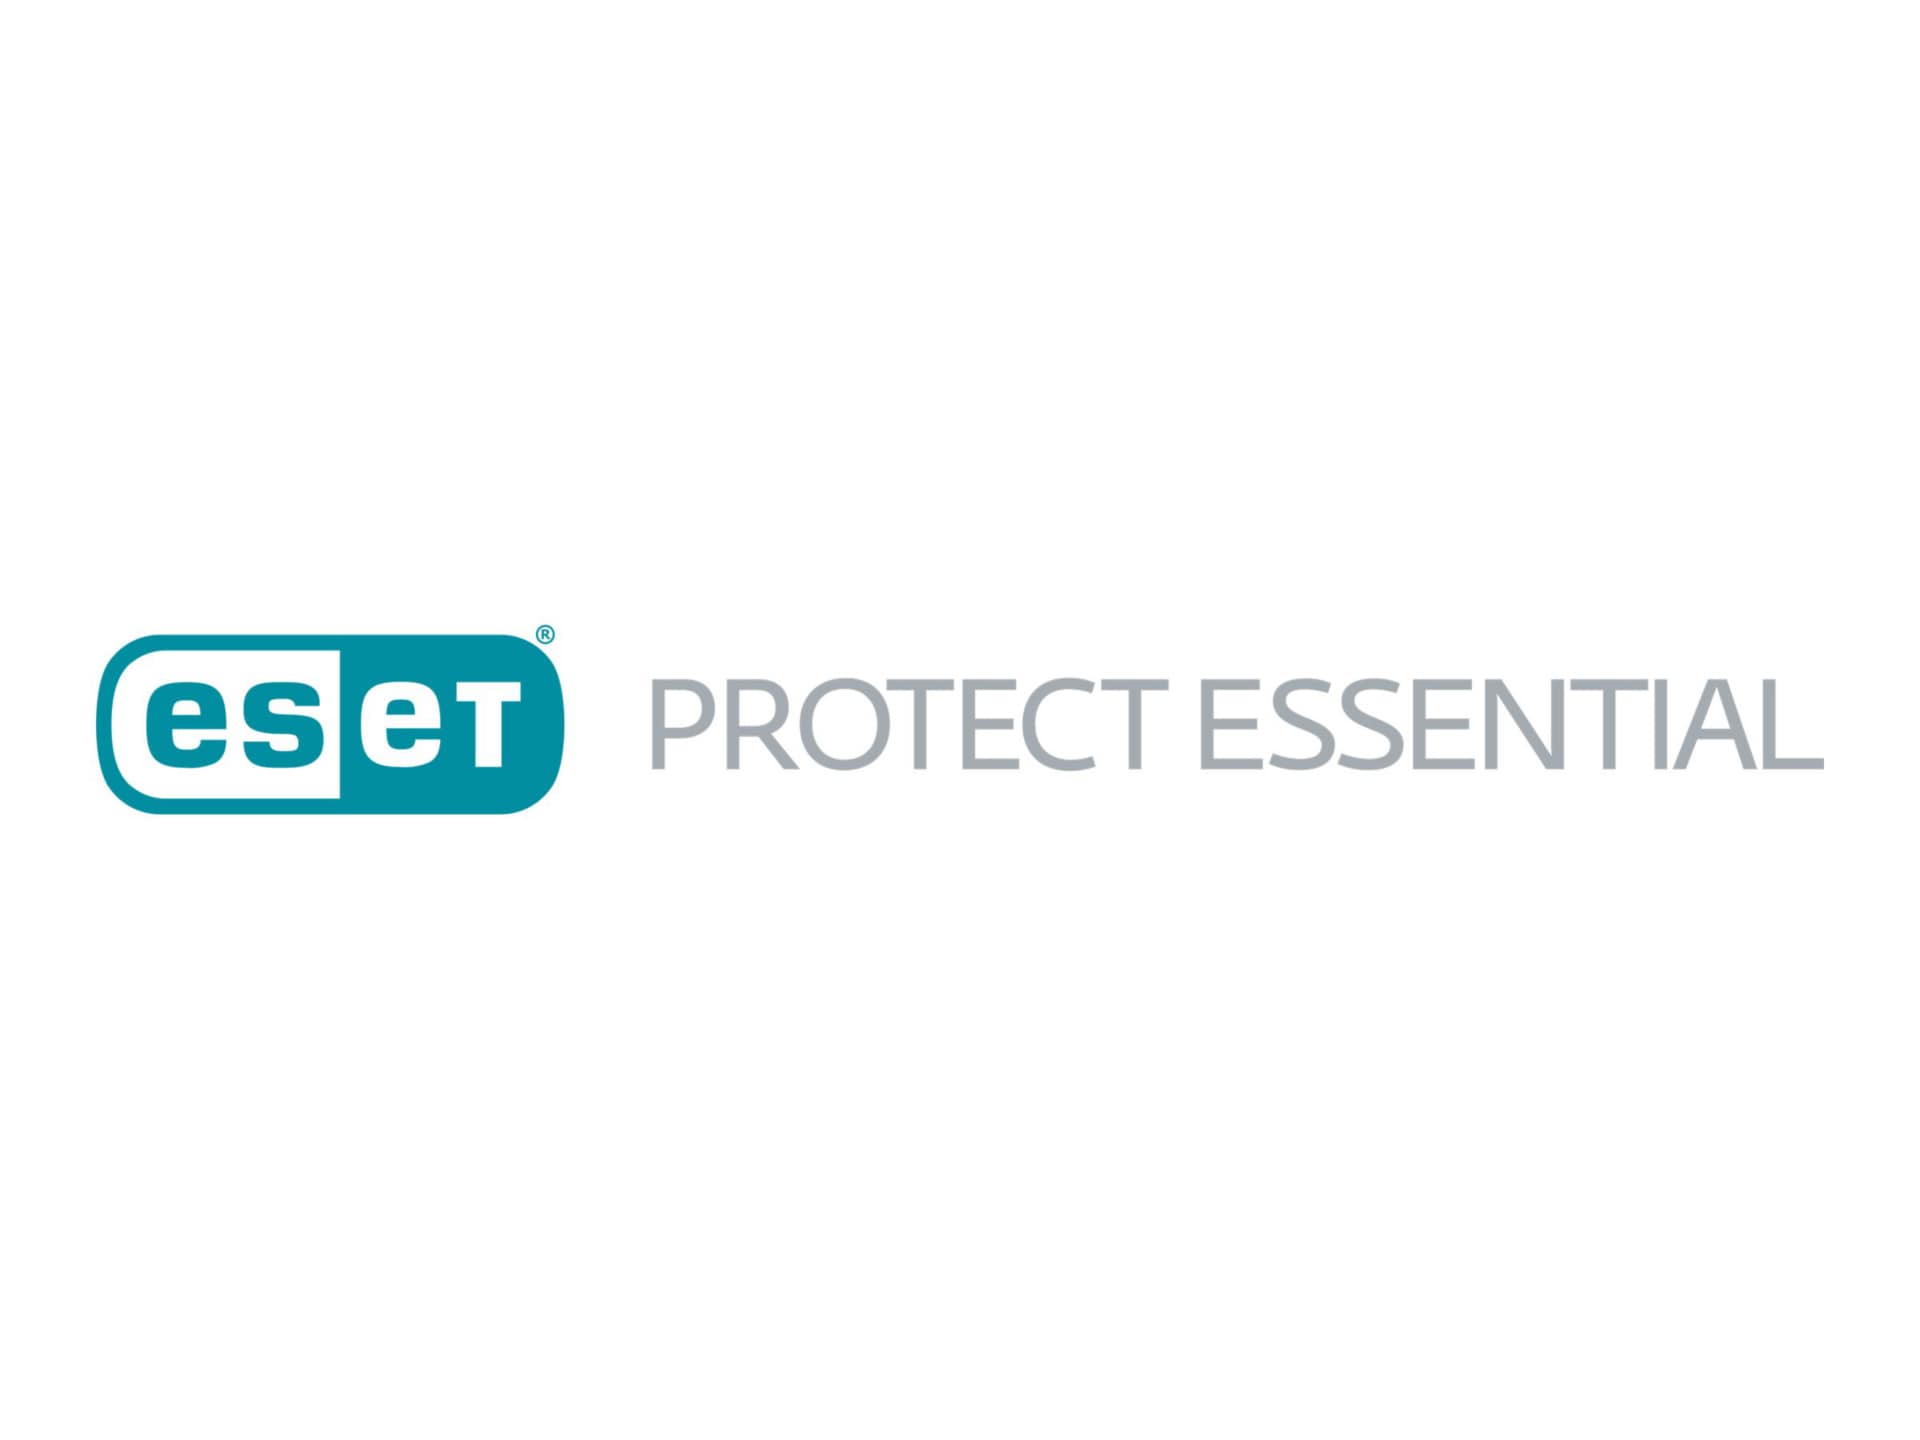 ESET PROTECT Essential Plus - subscription license renewal (1 year) - 1 device